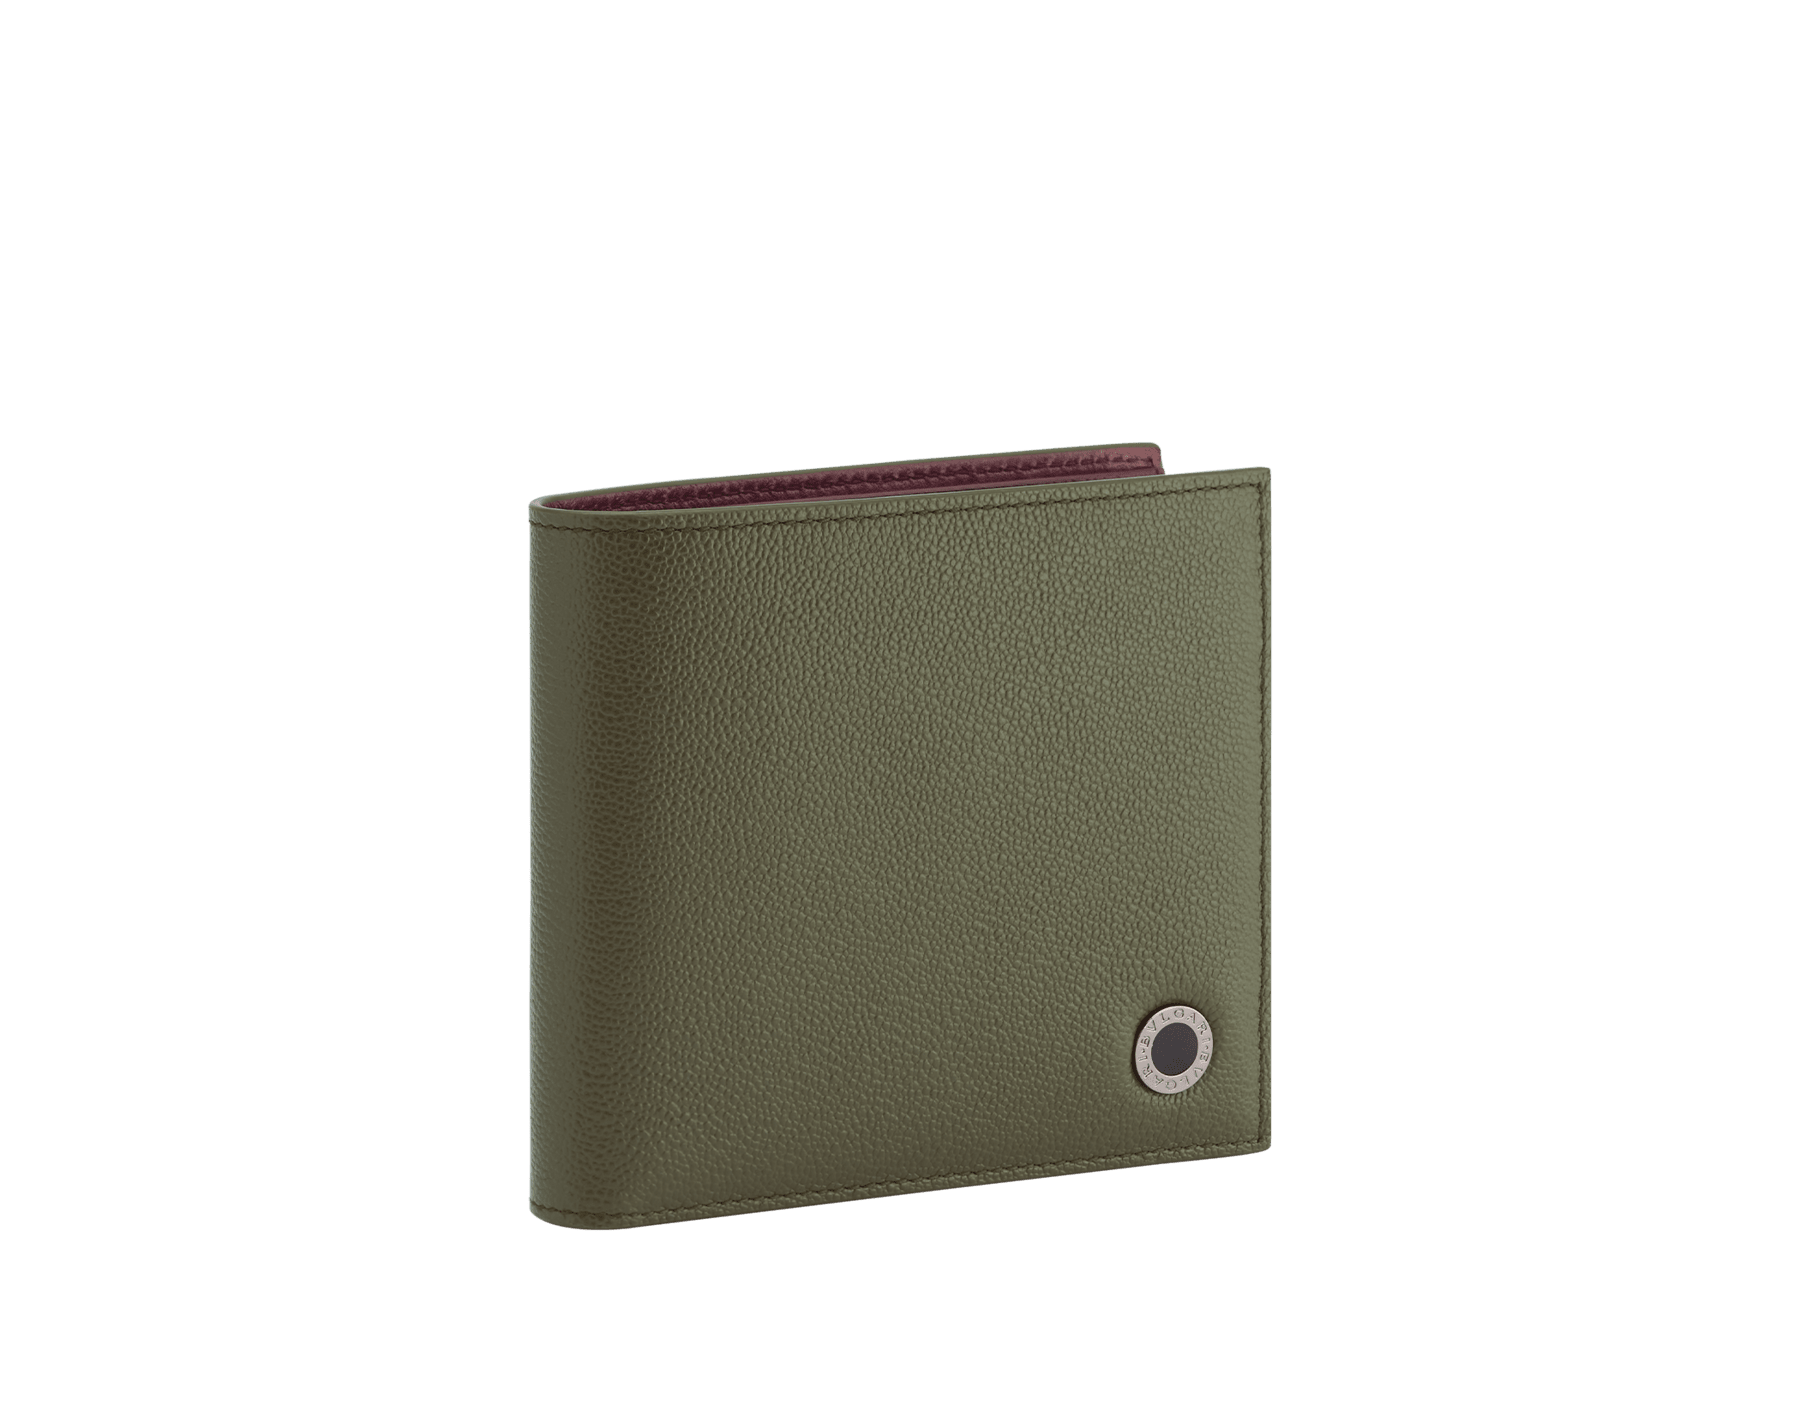 BULGARI BULGARI Man compact wallet in black Urban grain calf leather with forest emerald green Urban grain calf leather interior. Iconic dark ruthenium plated-brass décor enamelled in matte black, and folded closure. BBM-WLTITALASYMa image 1